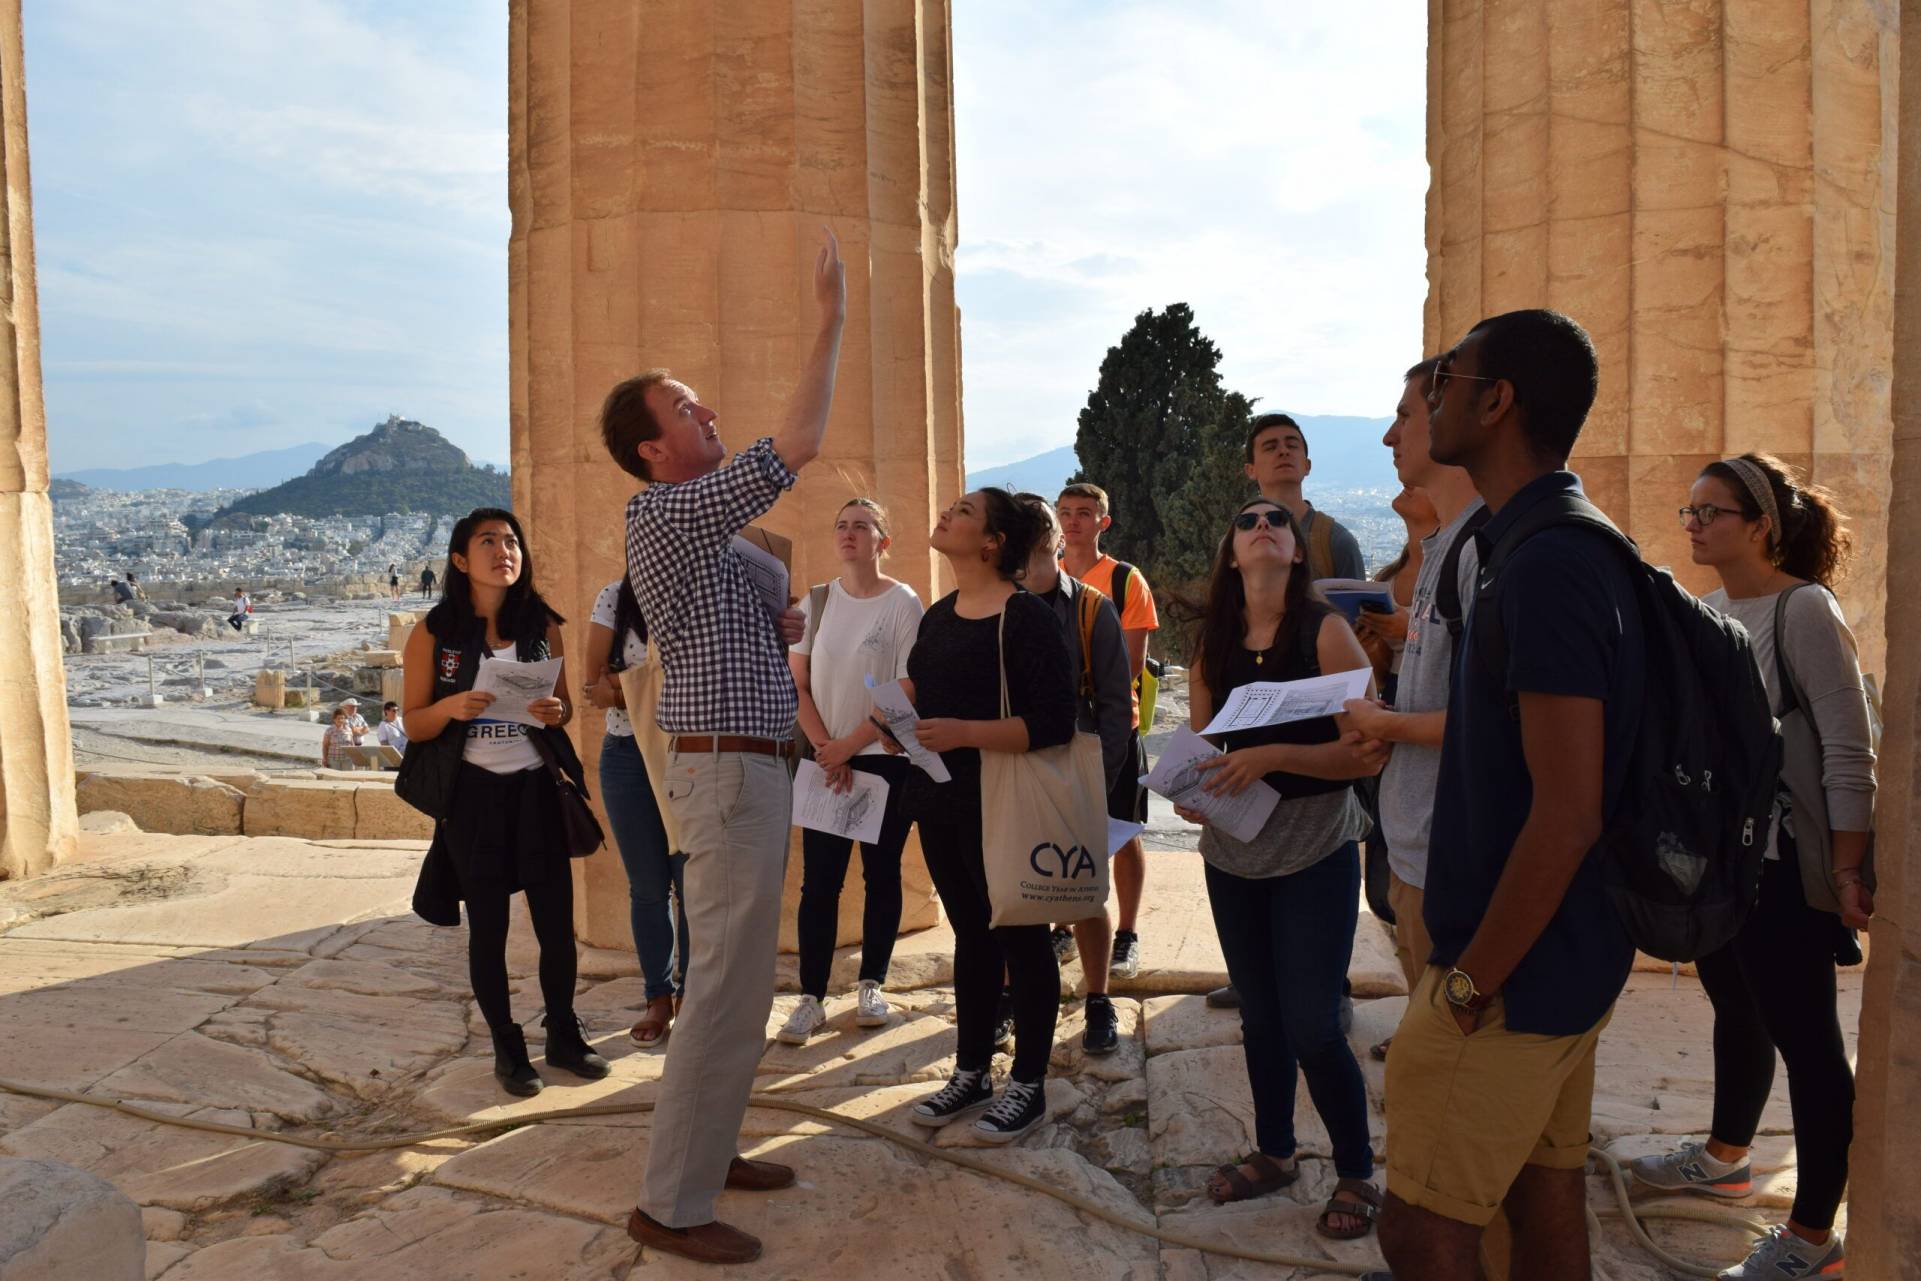 Greek Cooking 101! 2. Students of the Topography of Athens class get the rare opportunity to visit the inside of the Parthenon which is closed for the public scaled